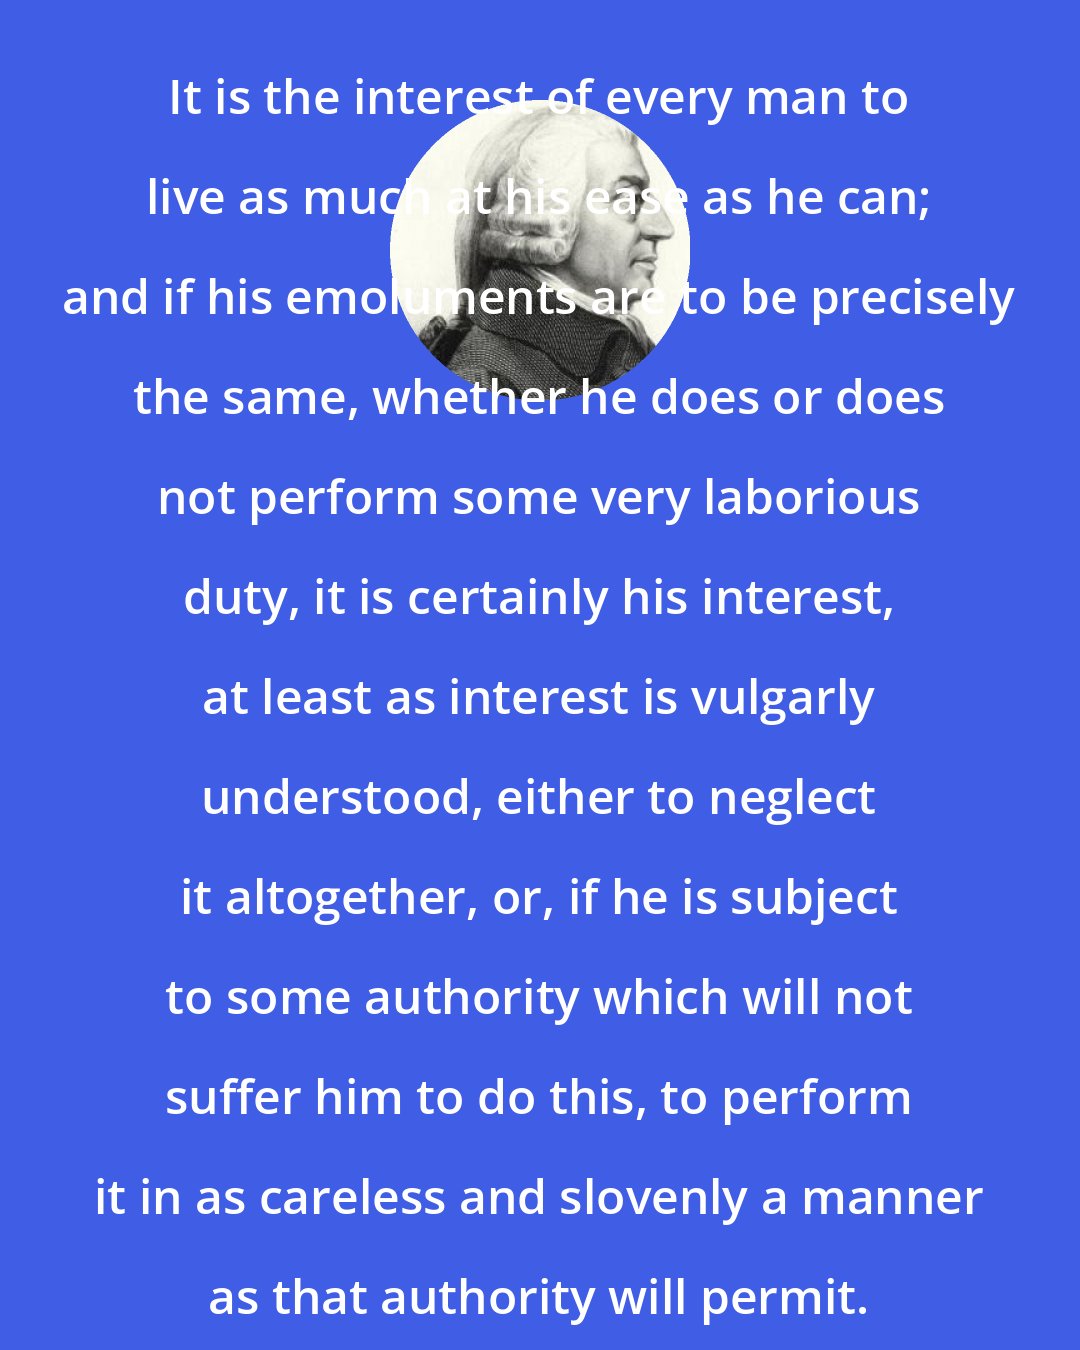 Adam Smith: It is the interest of every man to live as much at his ease as he can; and if his emoluments are to be precisely the same, whether he does or does not perform some very laborious duty, it is certainly his interest, at least as interest is vulgarly understood, either to neglect it altogether, or, if he is subject to some authority which will not suffer him to do this, to perform it in as careless and slovenly a manner as that authority will permit.